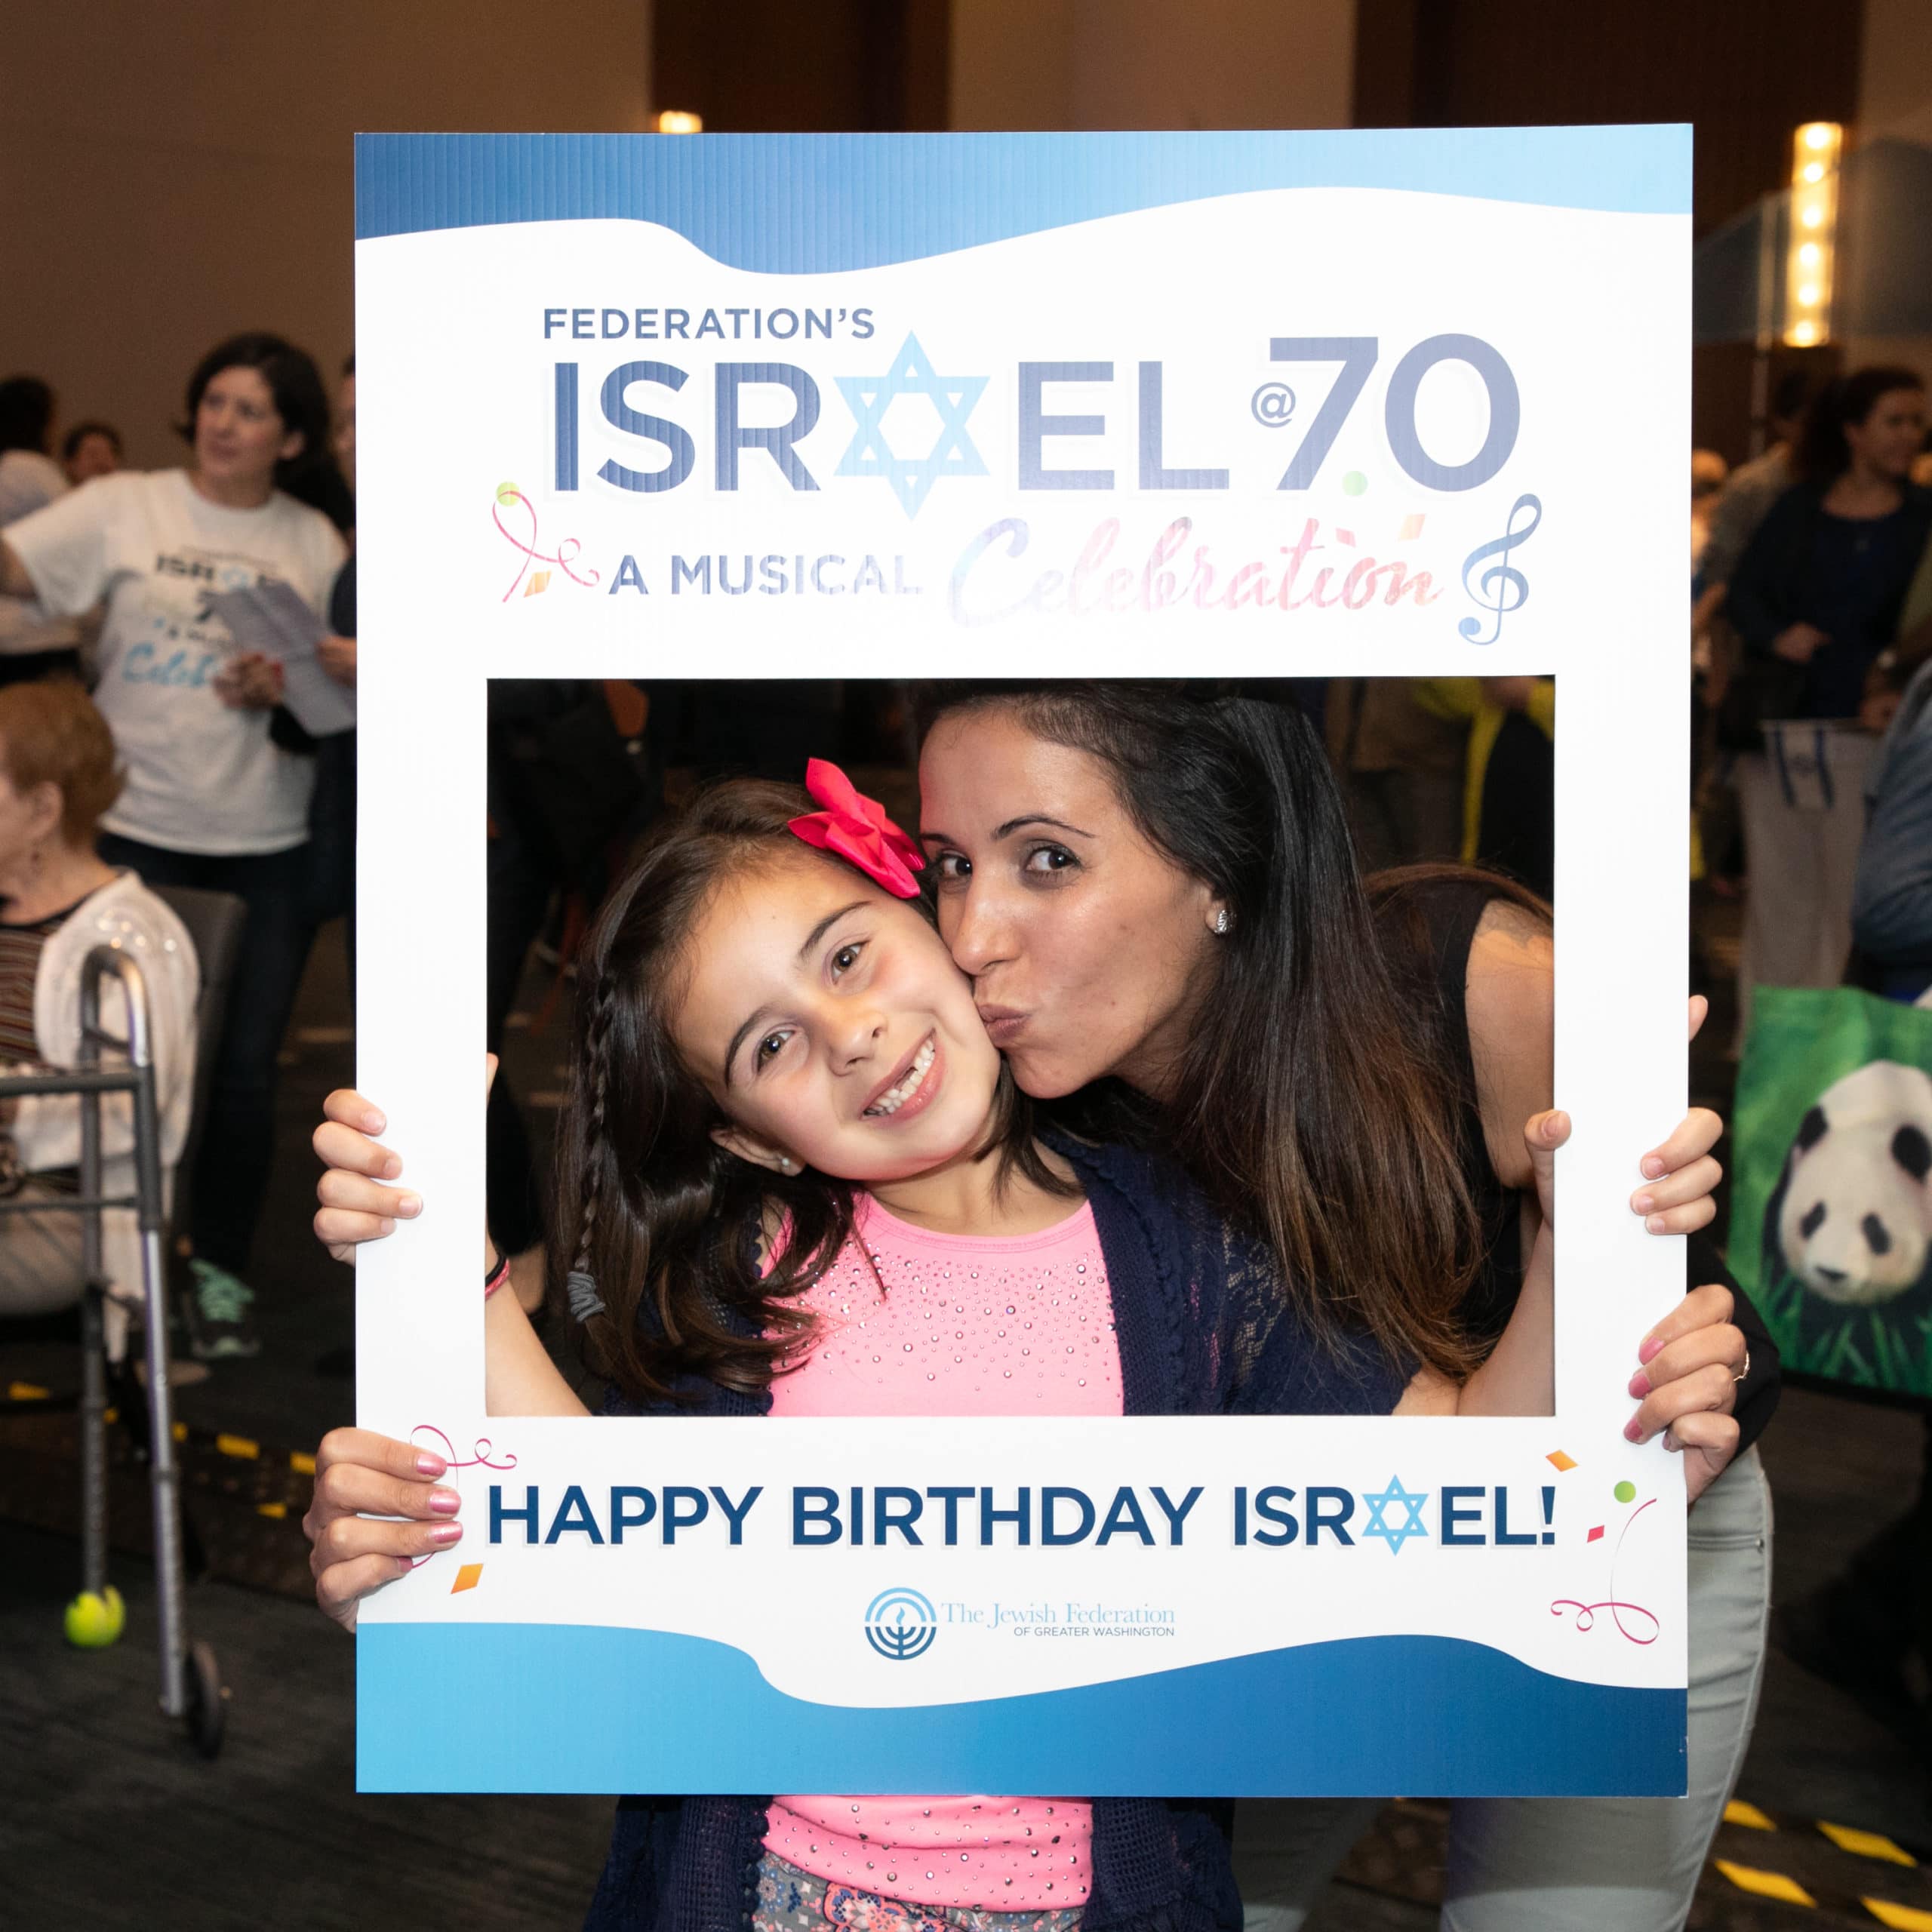 mom and daughter posing with Israel@70 cutout frame